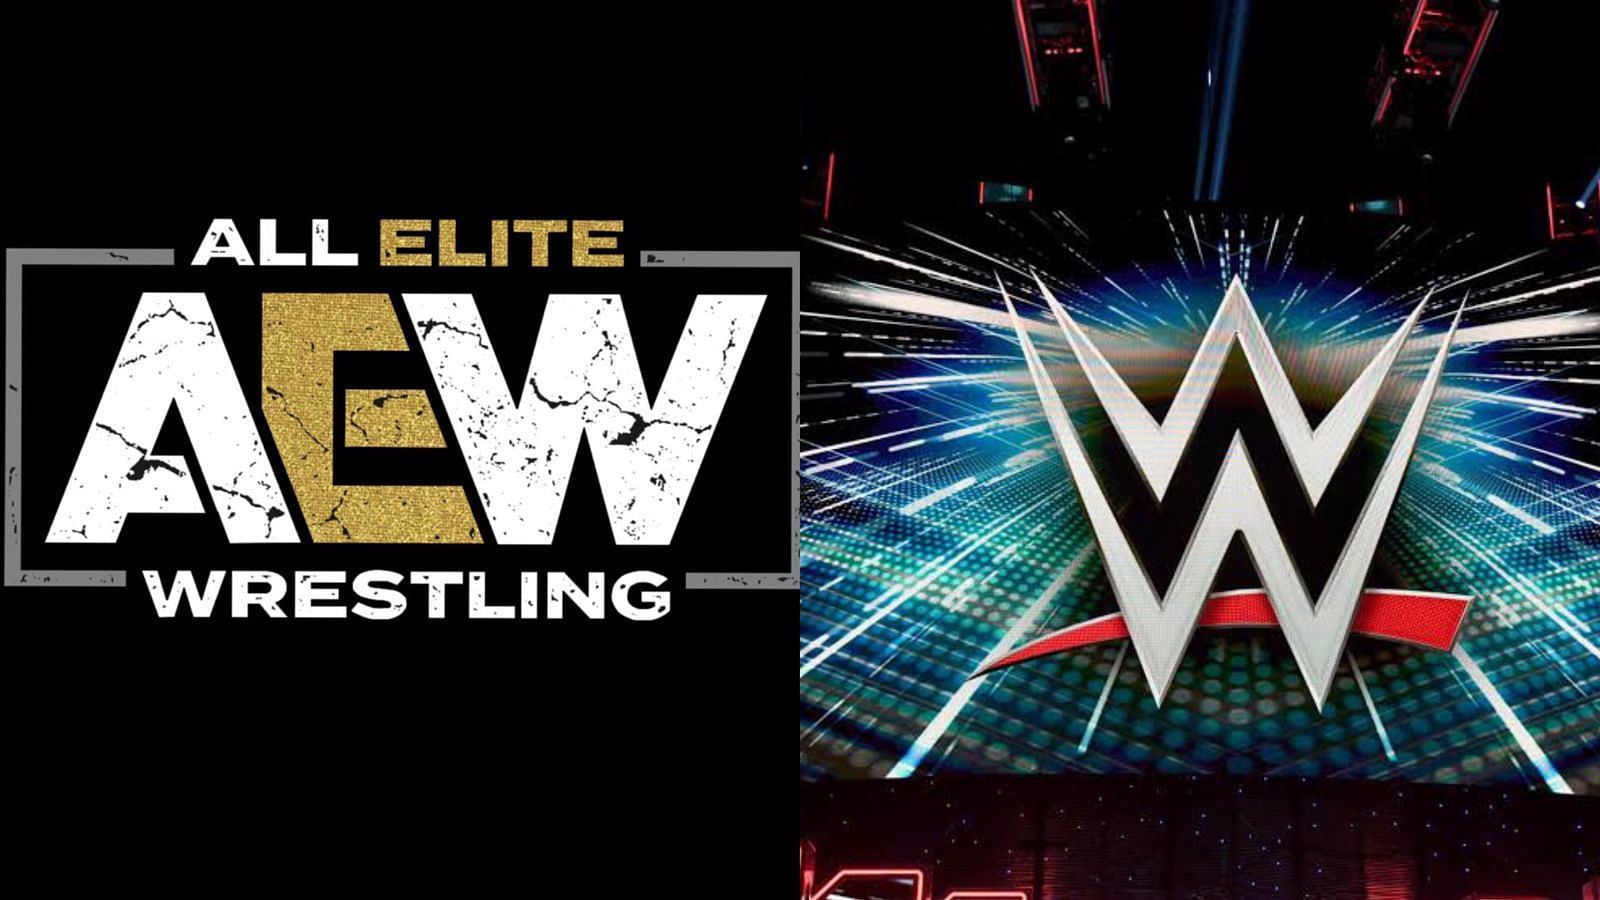 Former WWE star now officially with AEW